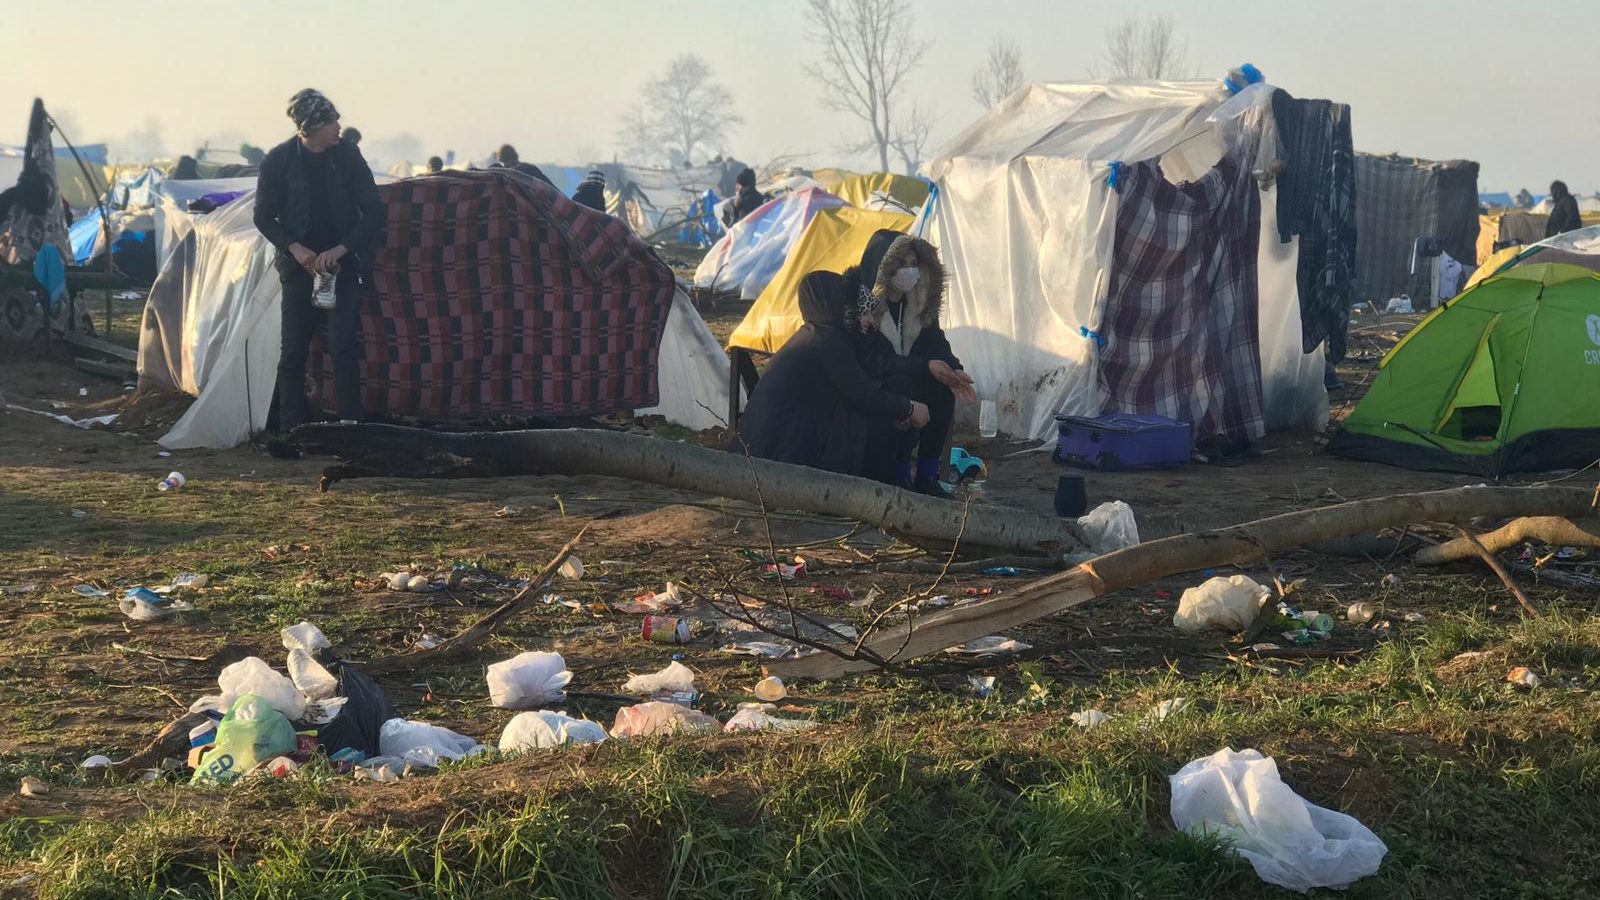 Turkey Turns to NGOs to Fill Gaps in COVID-19 Response for Refugees